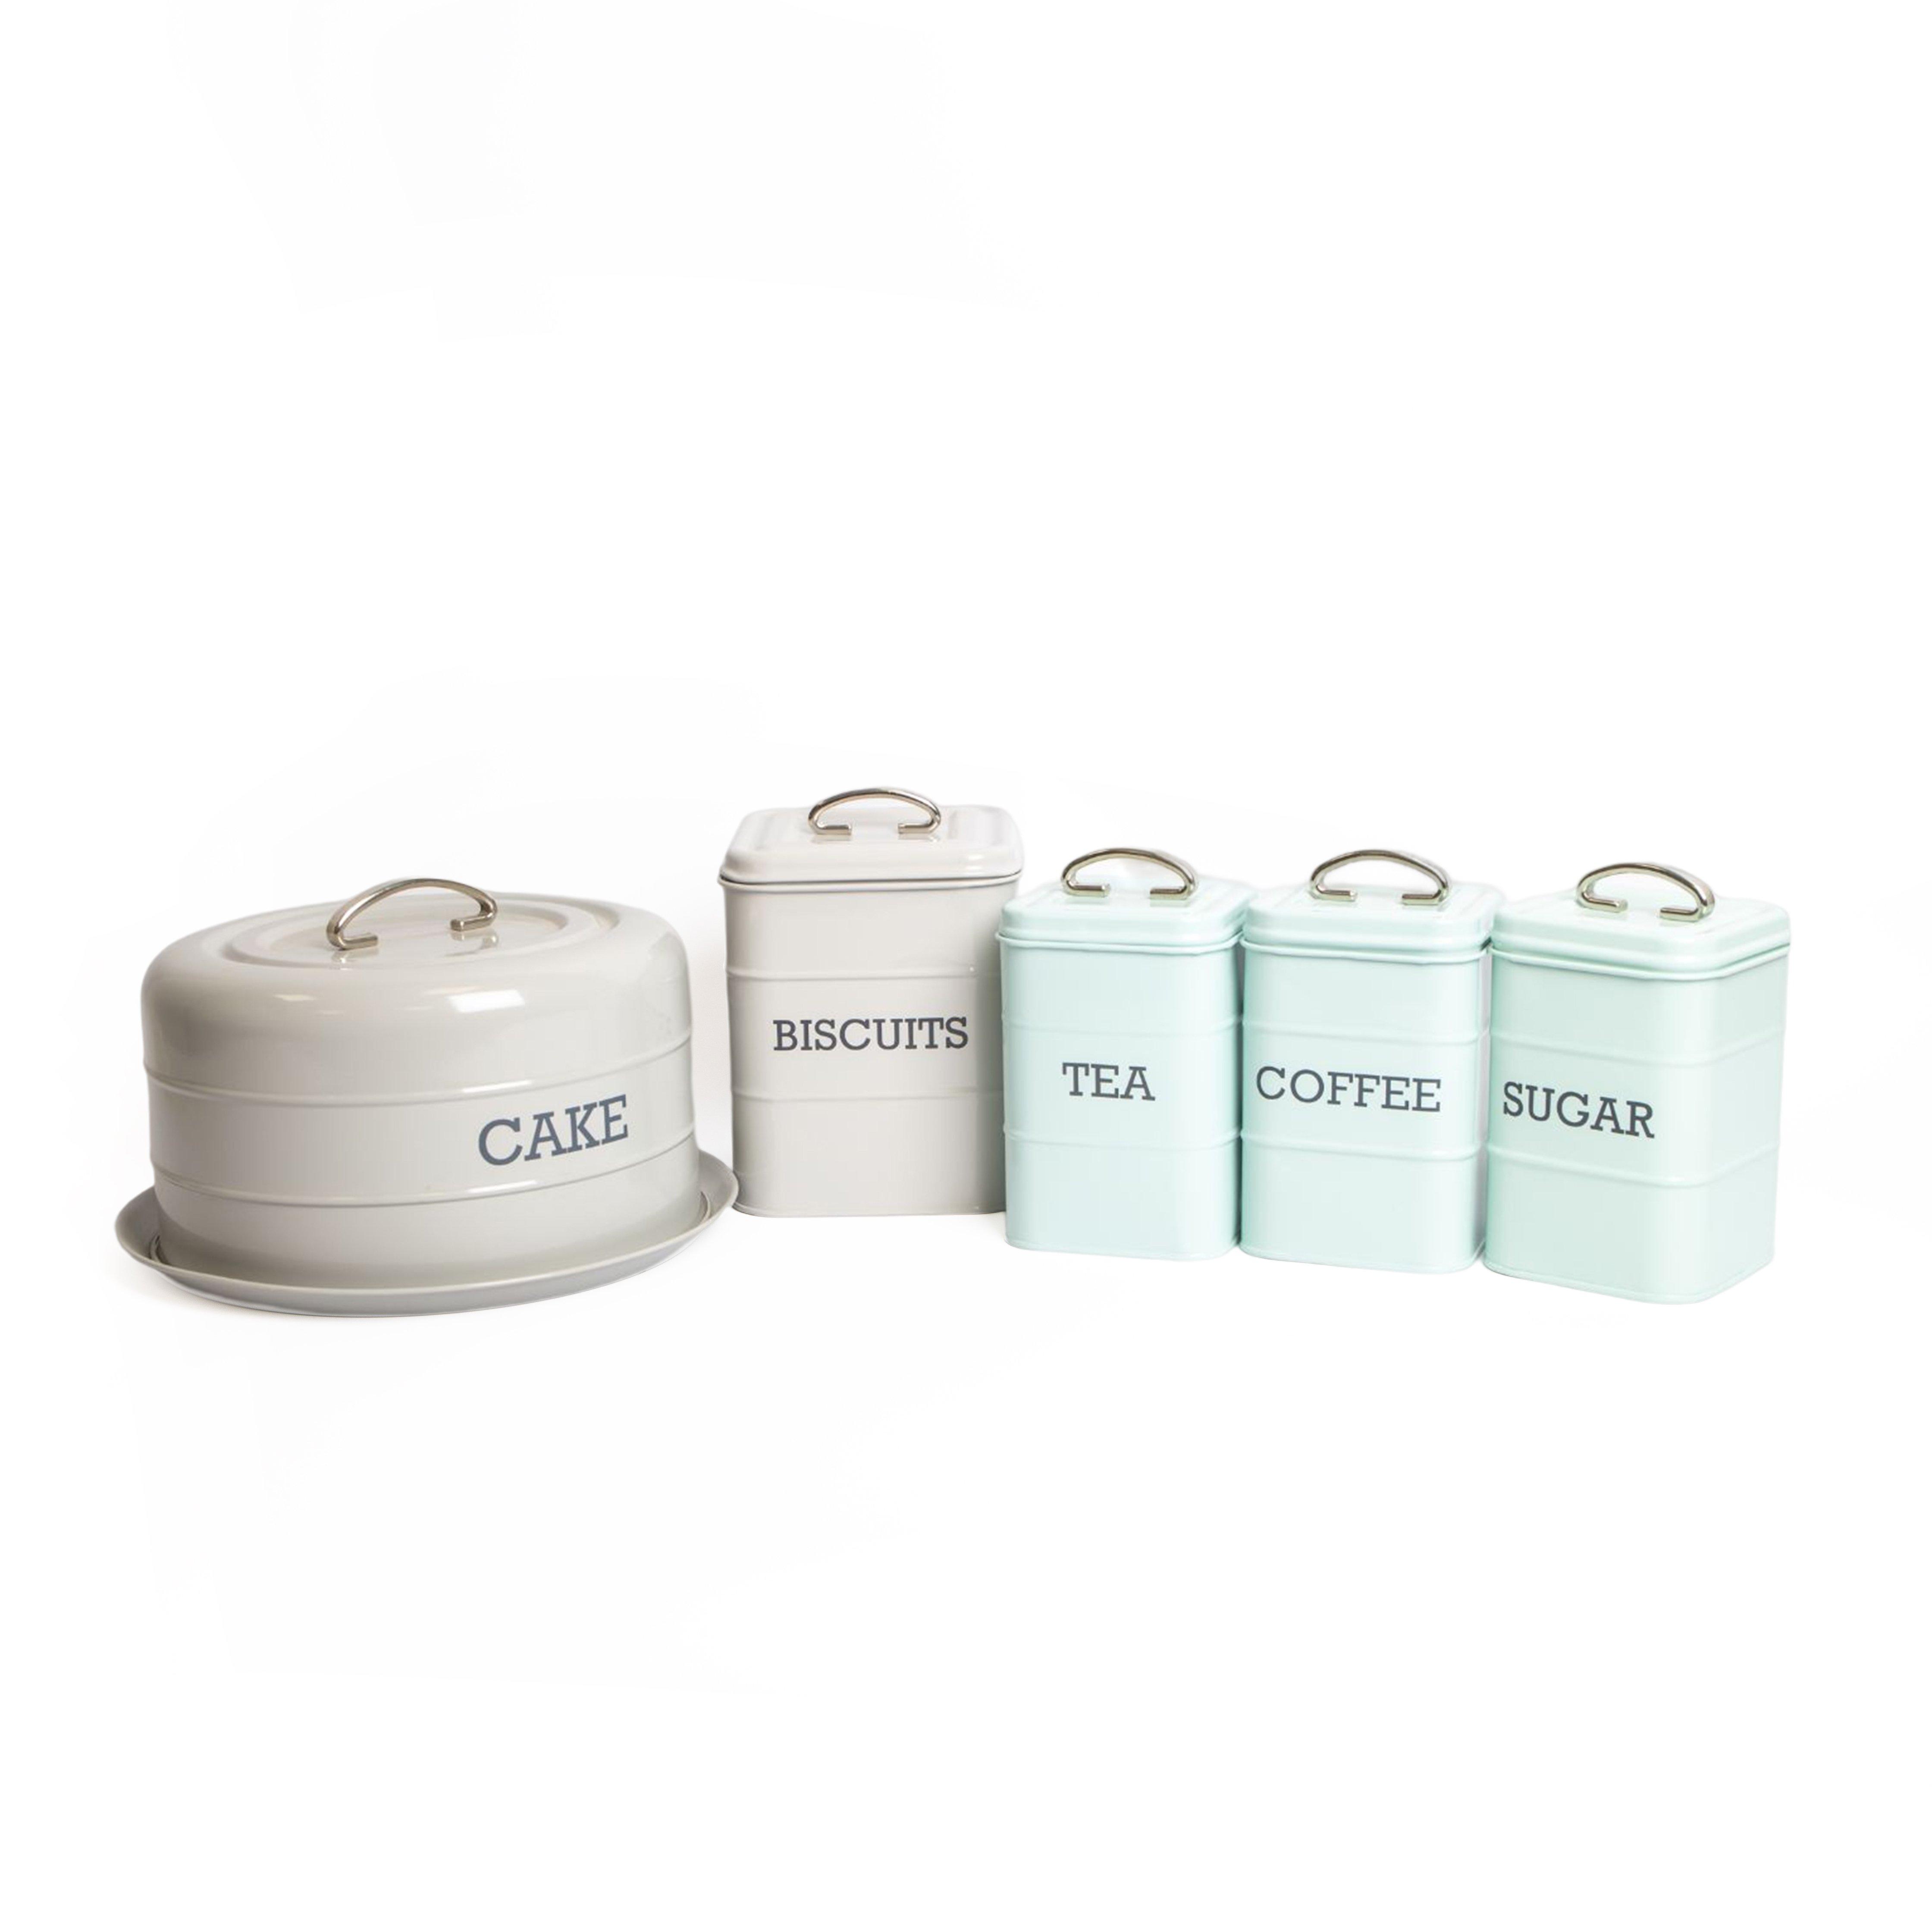 5pc Kitchen Storage Tin Set with Tea, Coffee & Sugar Canisters, Biscuit Tin and Domed Cake Tin